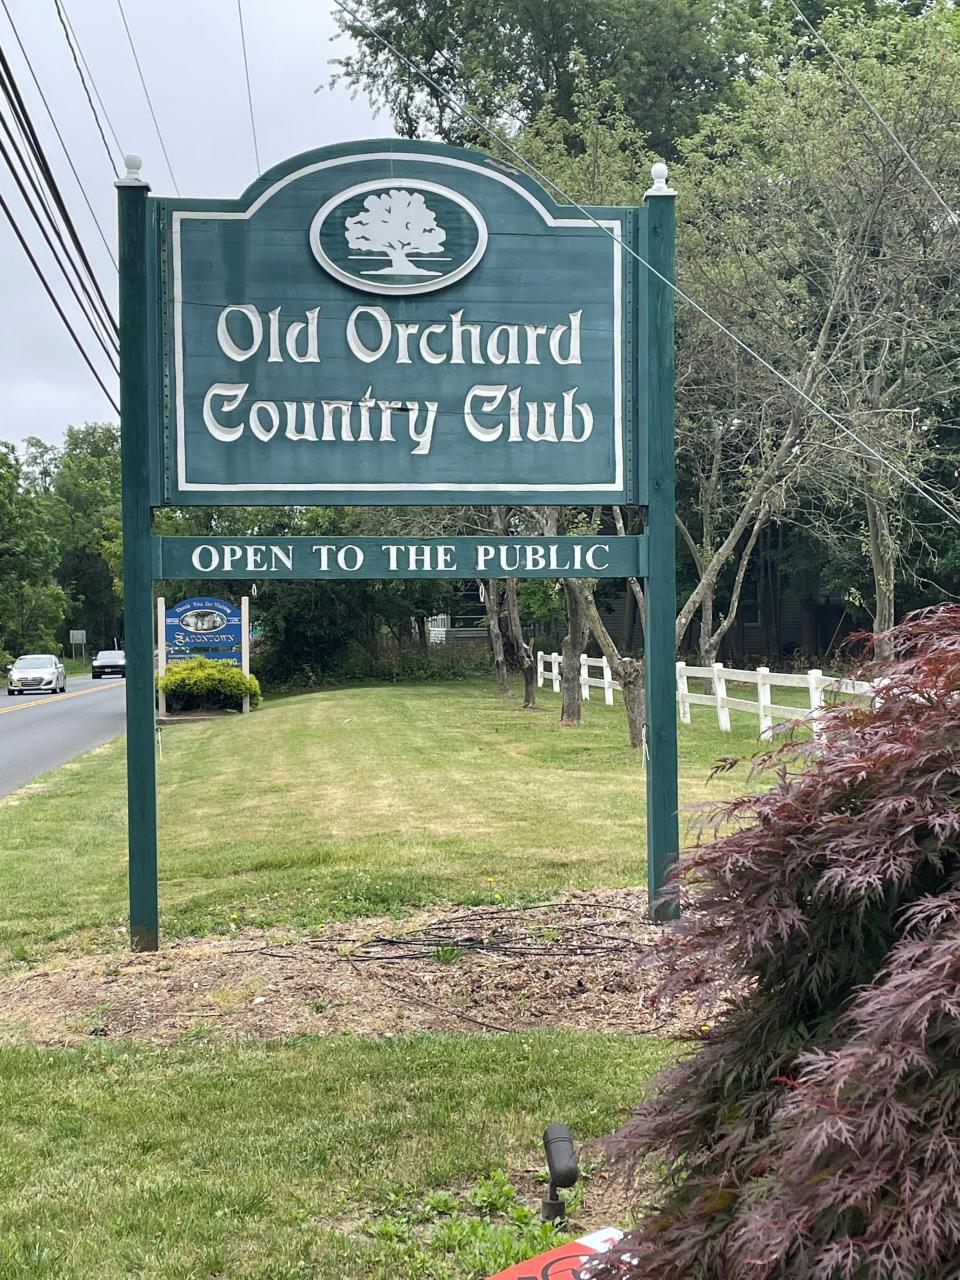 The entrance to Old Orchard Country Club off Monmouth Road in Eatontown.